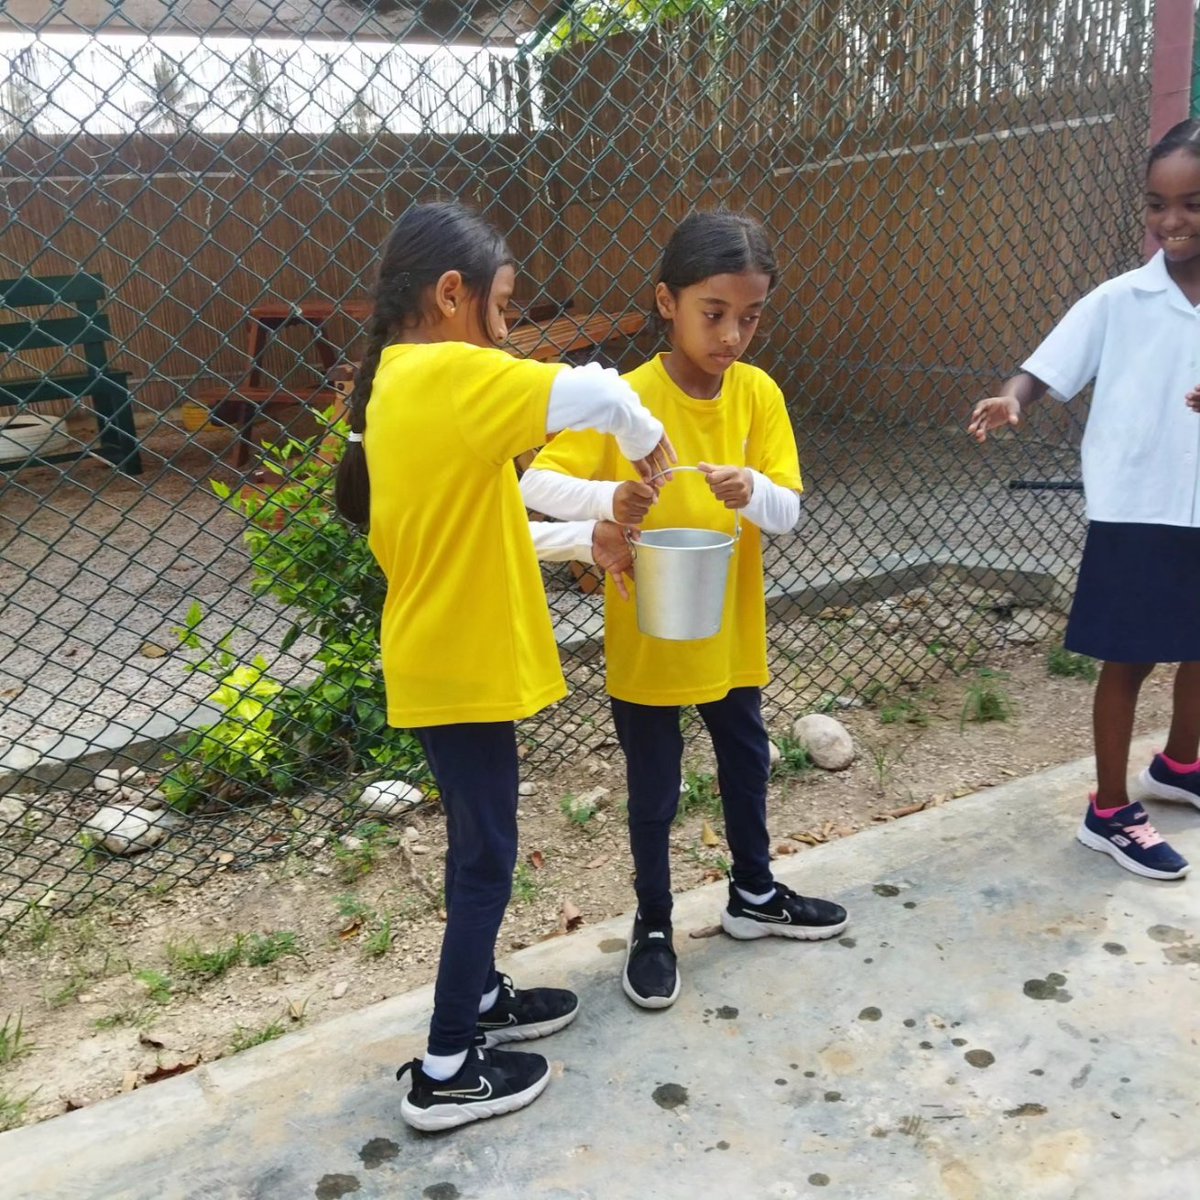 In PE, Year 2 have been learning the skills of relay races and team coordination. This has served them well to help to put out the Great Fire of London!

#WeAreBSS #BritishSchoolSalalah #BestForTheWorld #Kindness #Innovation #Excellence #EveryoneCan #NotForProfit